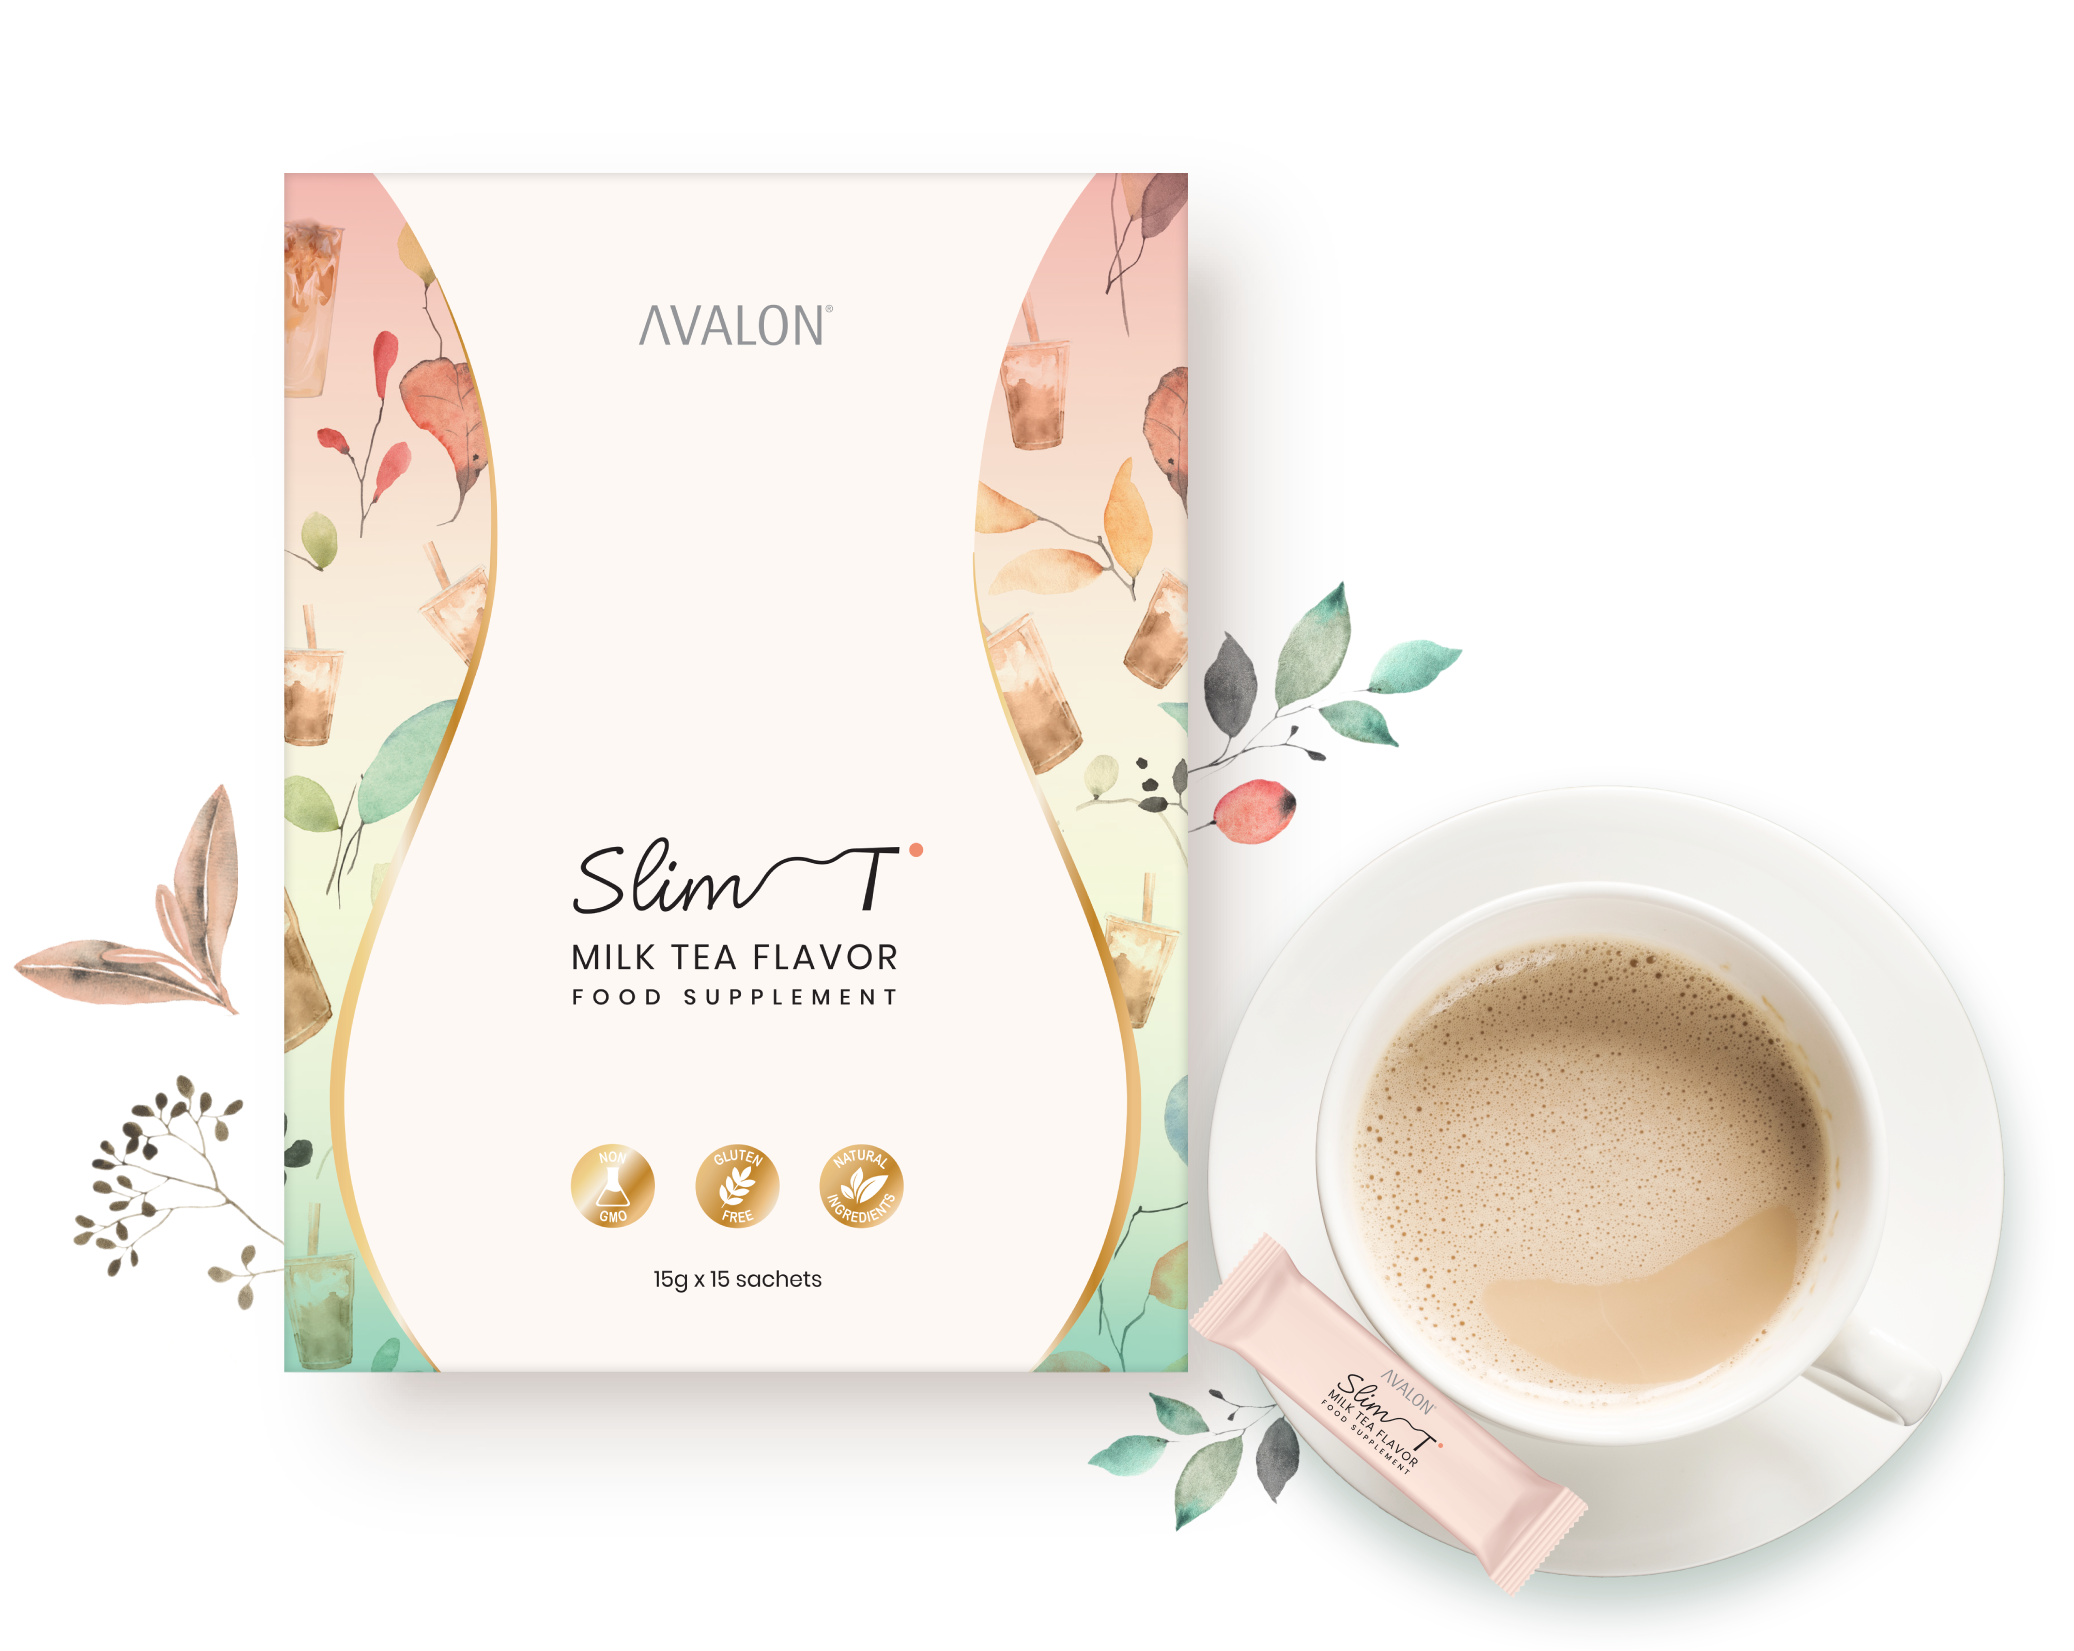 Enjoy deliciously guilt-free milk tea while maintaining a healthy weight and preventing blood sugar spikes. AVALON® Slim T is made with White Kidney Bean Extract (Phase II Carb Controller), African Wild Mango Seed Extract (Fat Blocker), L-arabinose (Sugar Blocker), Vitamin B Complex, Folic Acid and Biotin. Slimming, boosts metabolism, weight management, maintains healthy blood sugar levels, blocks carbs and fat absorption, promotes partial satiety. Formulated for daily use, our functional beverage is low in calories and skin-friendly, whilst satisfying your milk tea craving.